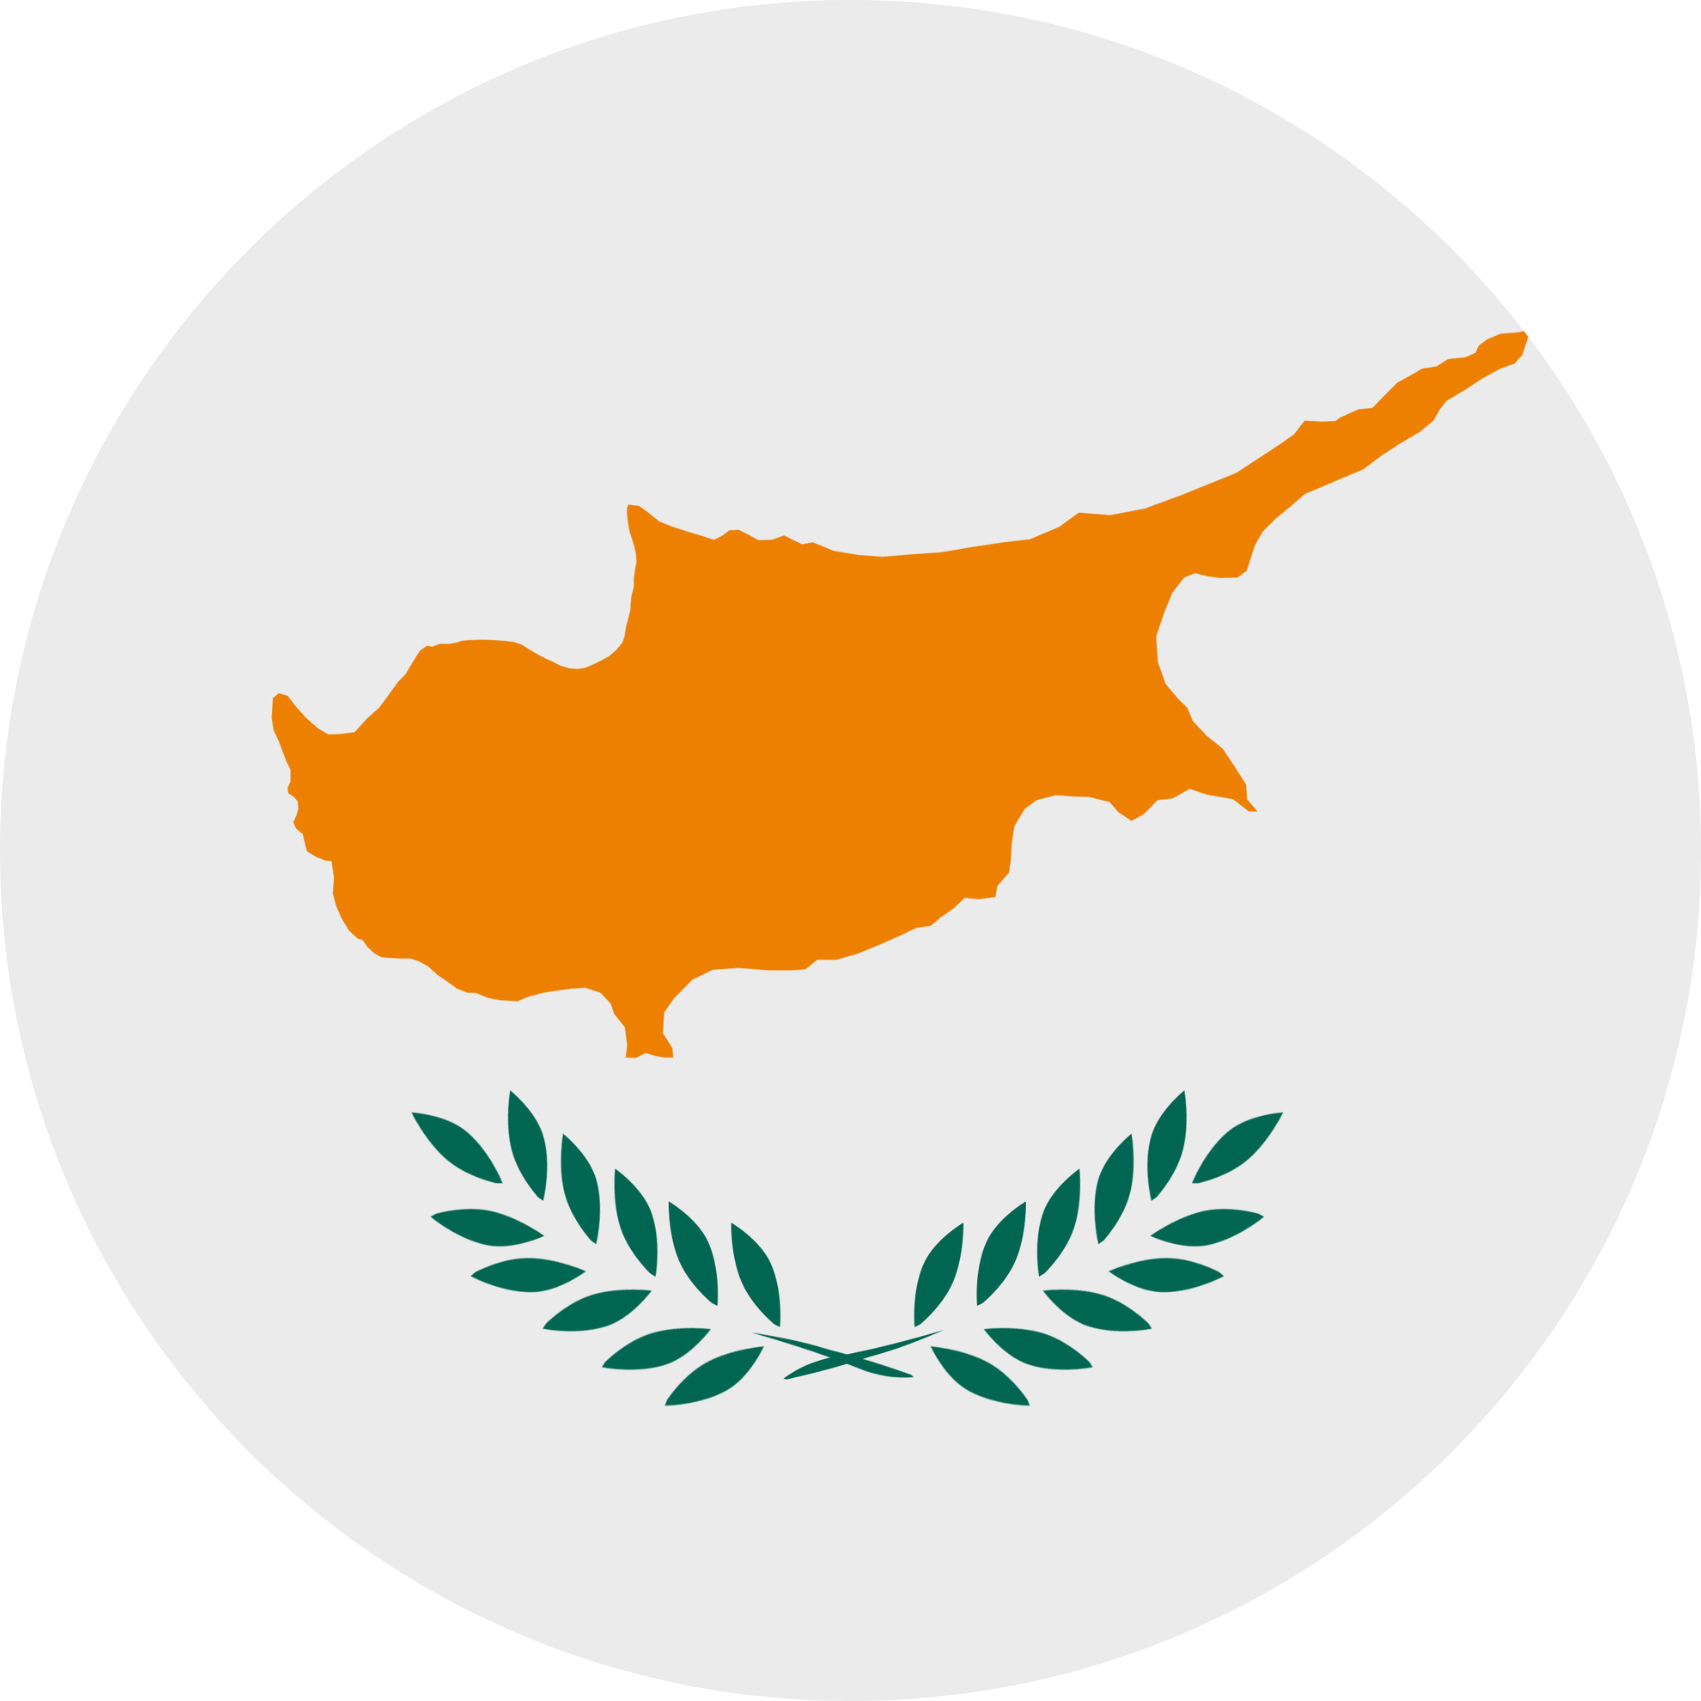 Cyprus flag in a circle